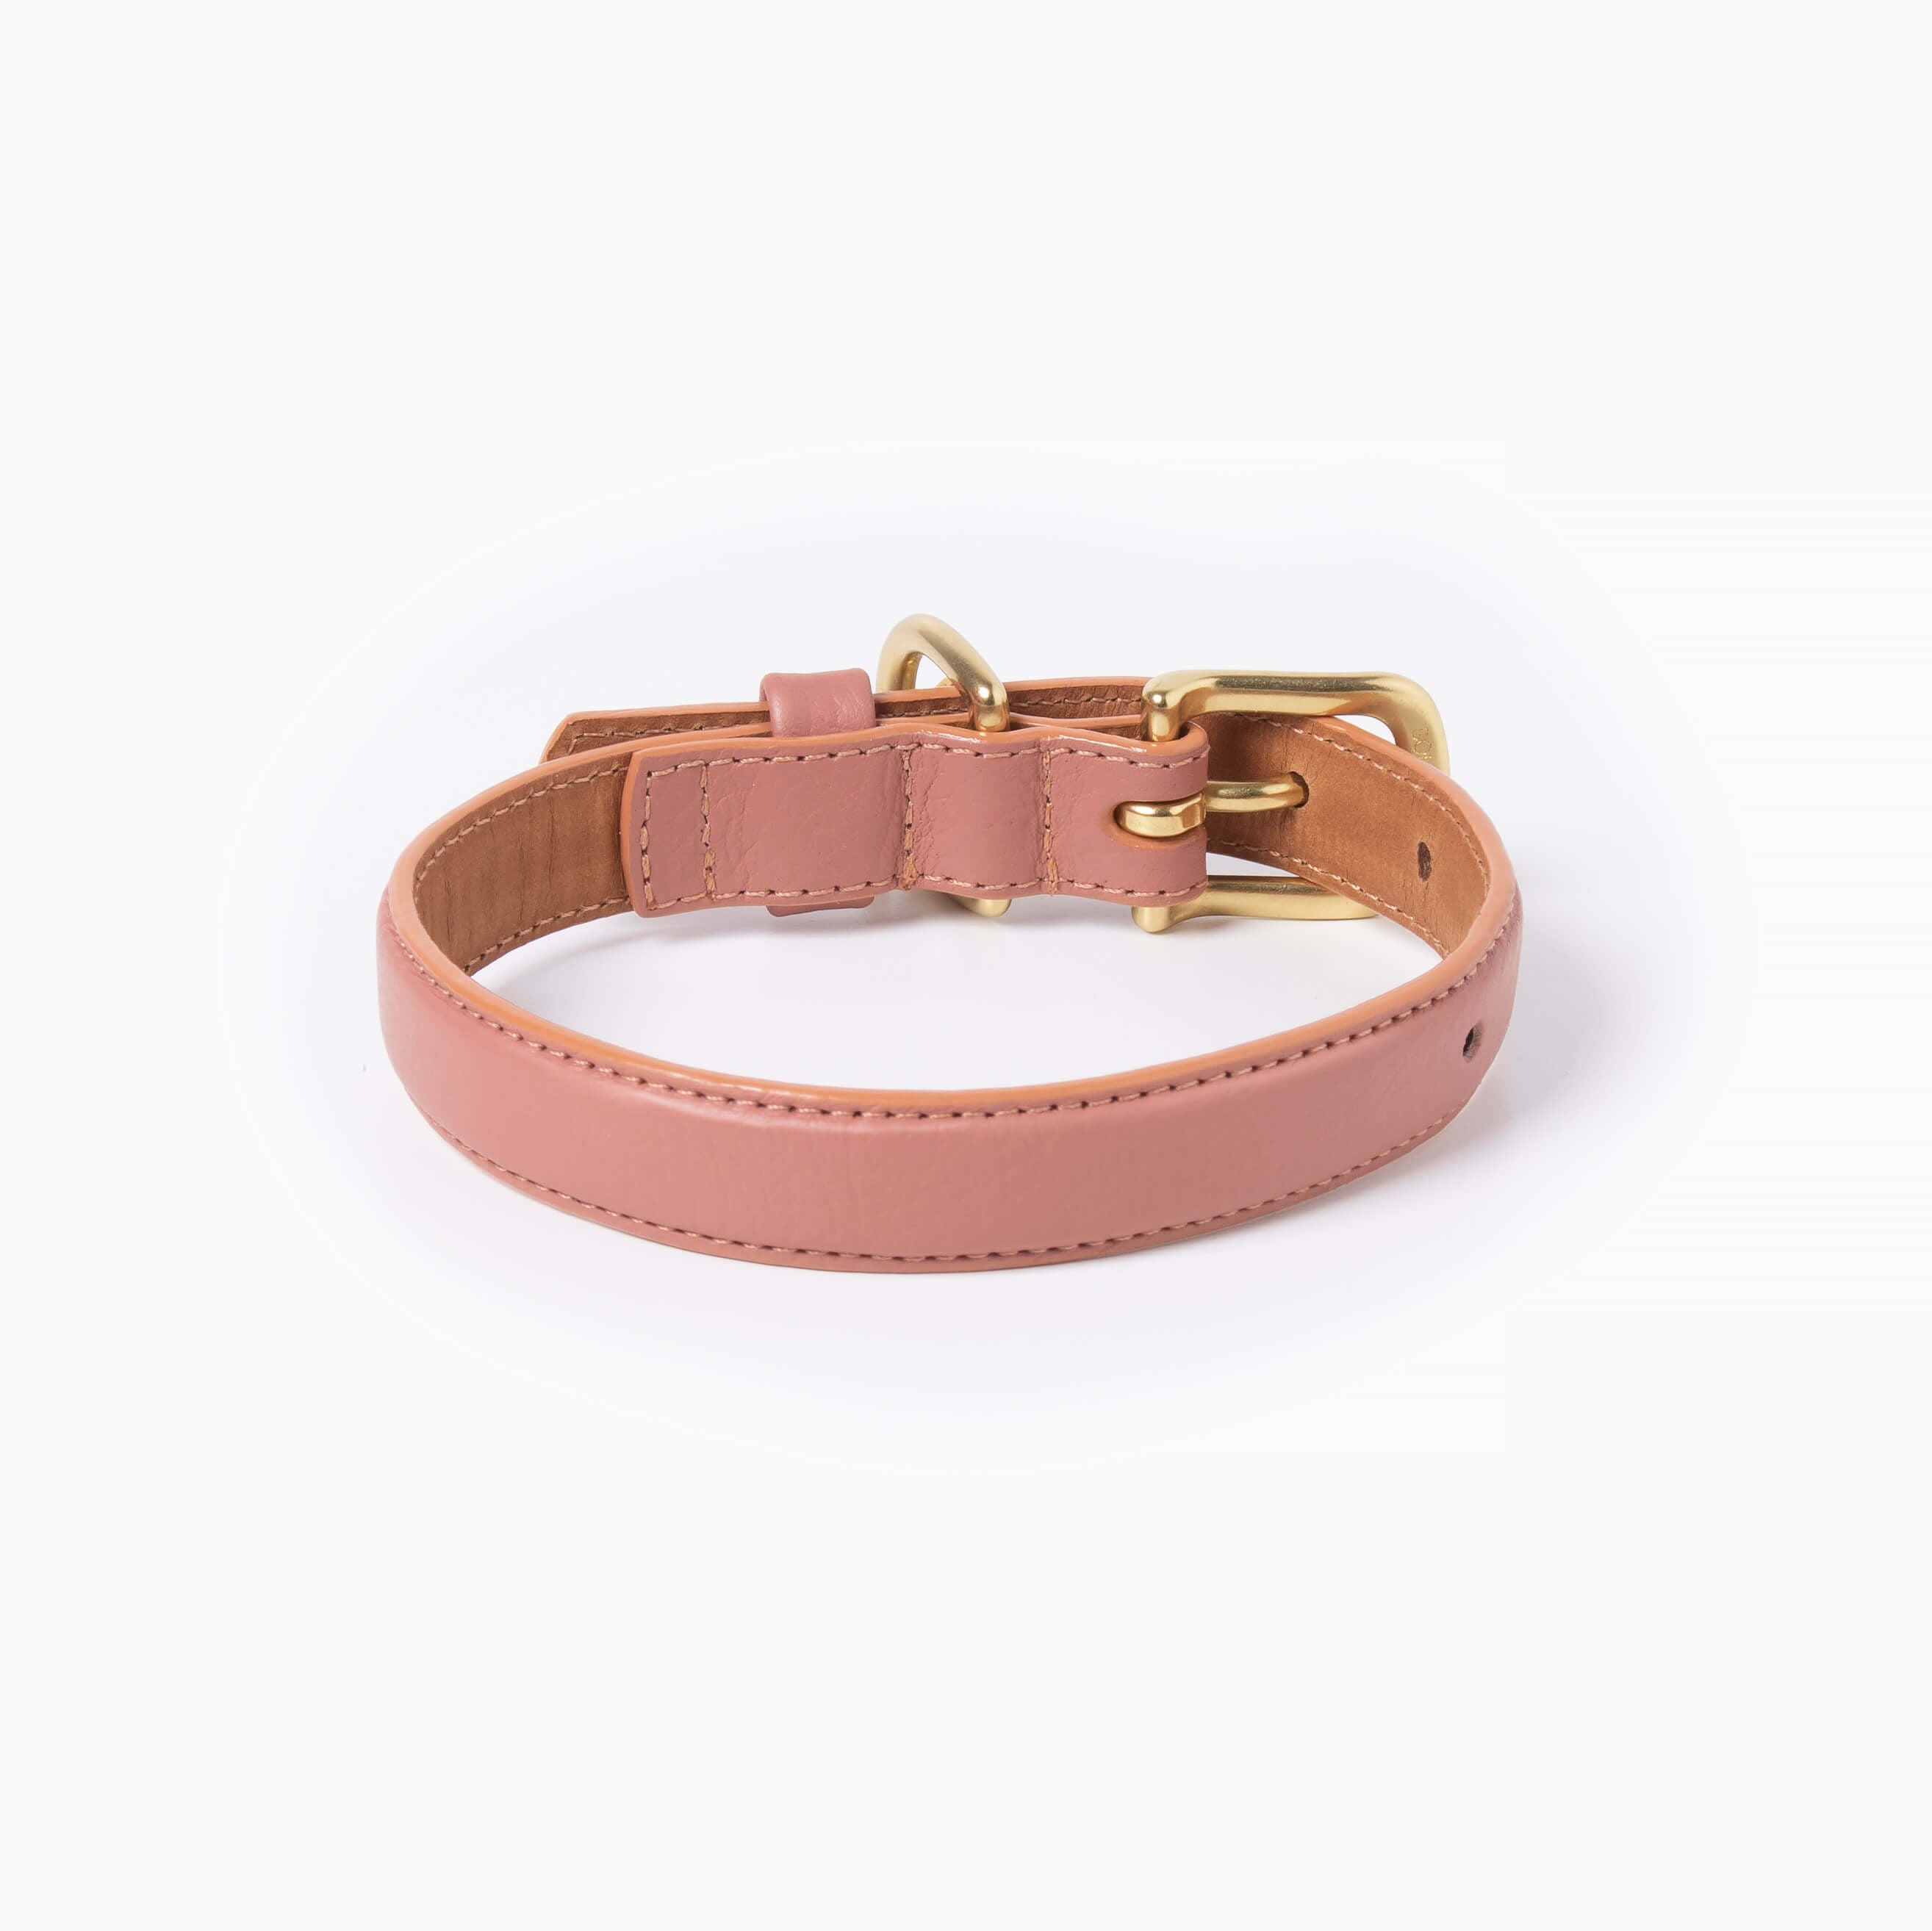 Nude pink leather dog collar with with brass hardware and tag ID. Luxury dog collar.